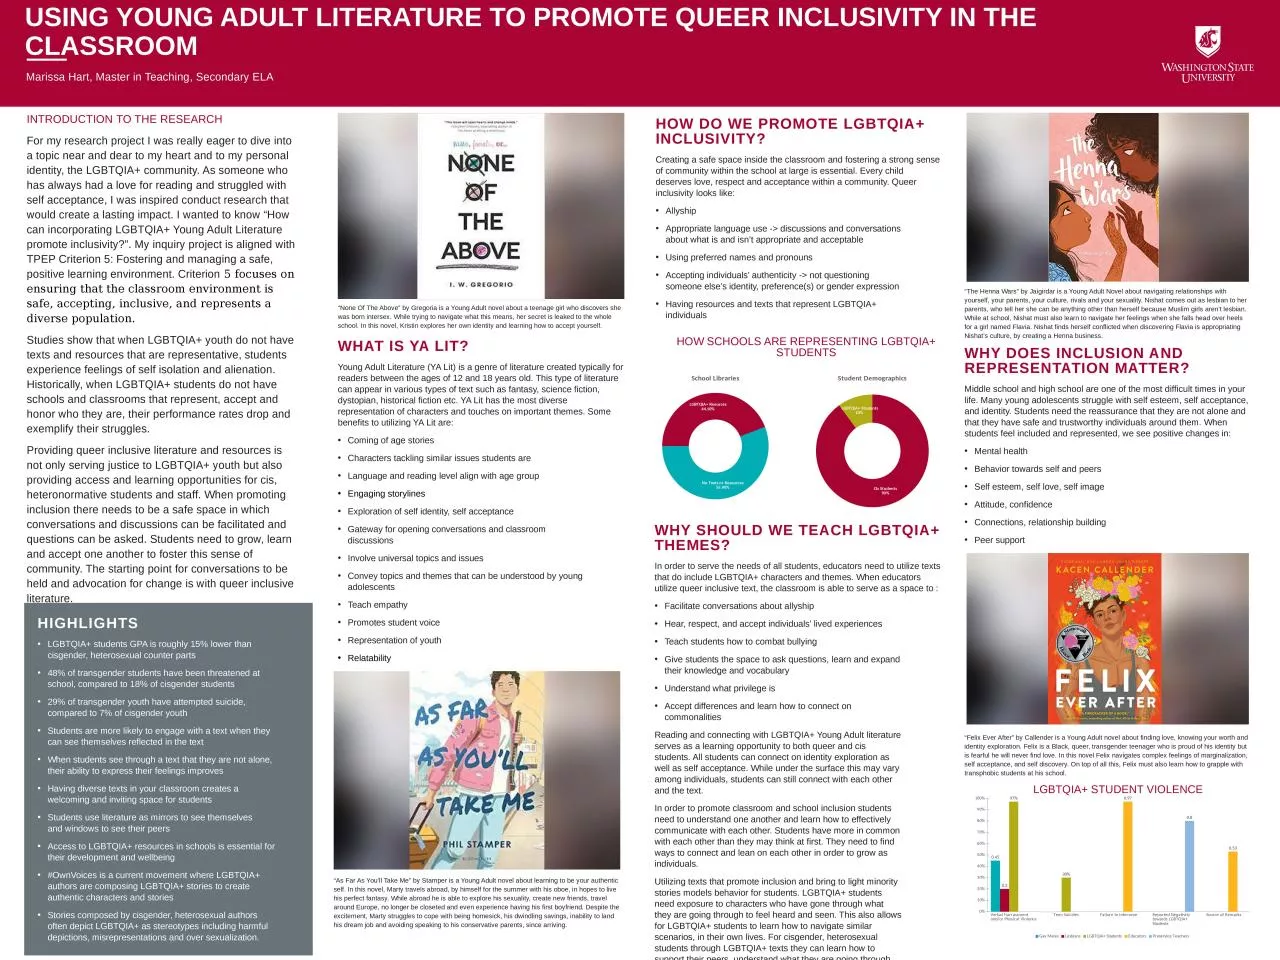 Using Young Adult Literature to promote Queer inclusivity in the classroom